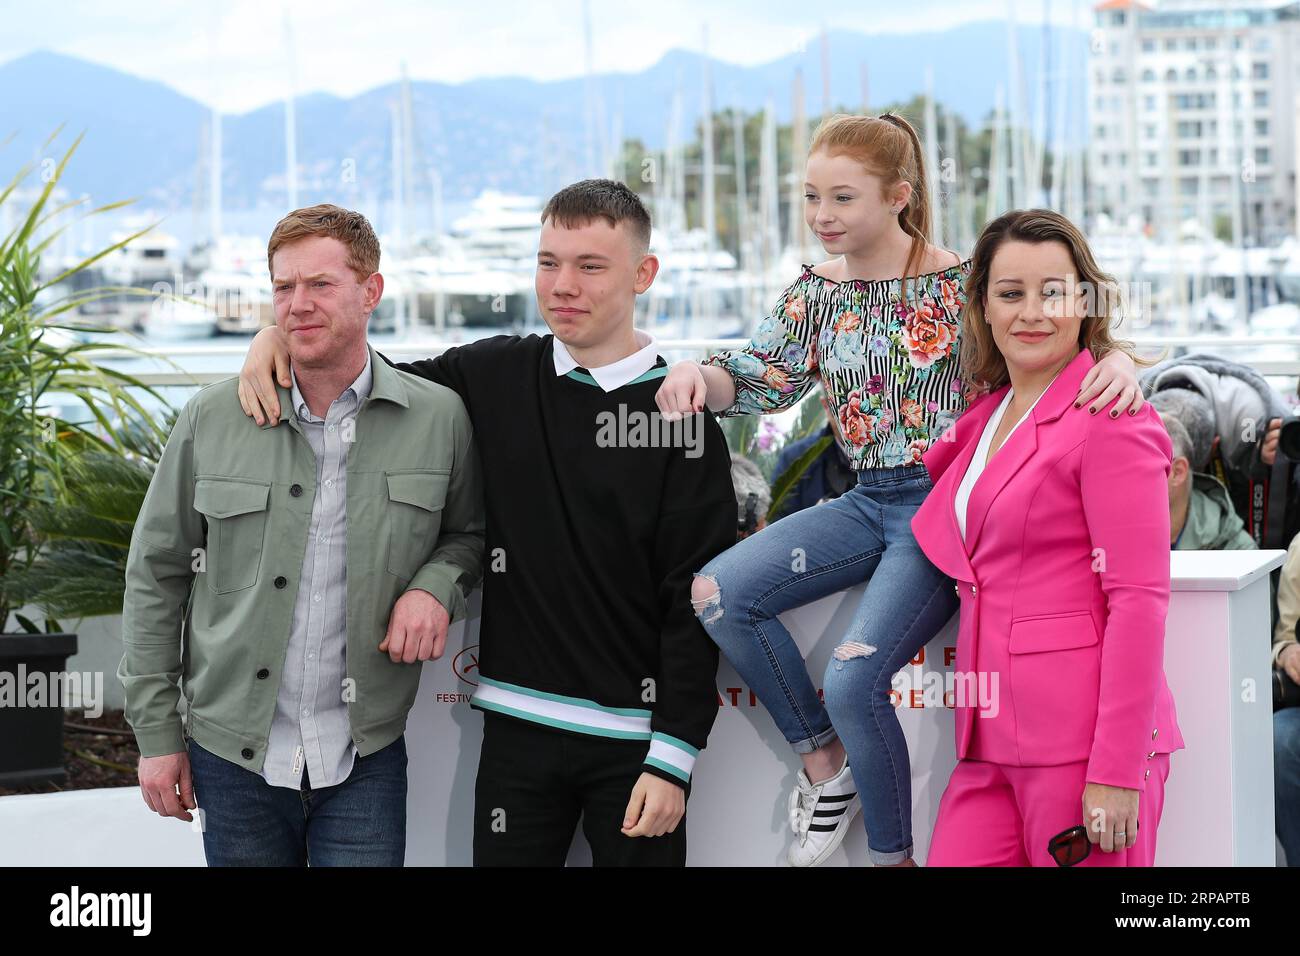 (190517) -- CANNES, May 17, 2019 (Xinhua) -- (L-R) Kris Hitchen, Rhys Stone, Katie Proctor and Debbie Honeywood pose during a photocall for the film Sorry We Missed You at the 72nd Cannes Film Festival in Cannes, France, May 17, 2019. British director Ken Loach s film Sorry We Missed You will compete for the Palme d Or with other 20 feature films during the 72nd Cannes Film Festival which is held from May 14 to 25. (Xinhua/Zhang Cheng) FRANCE-CANNES-72ND FILM FESTIVAL-SORRY WE MISSED YOU PUBLICATIONxNOTxINxCHN Stock Photo